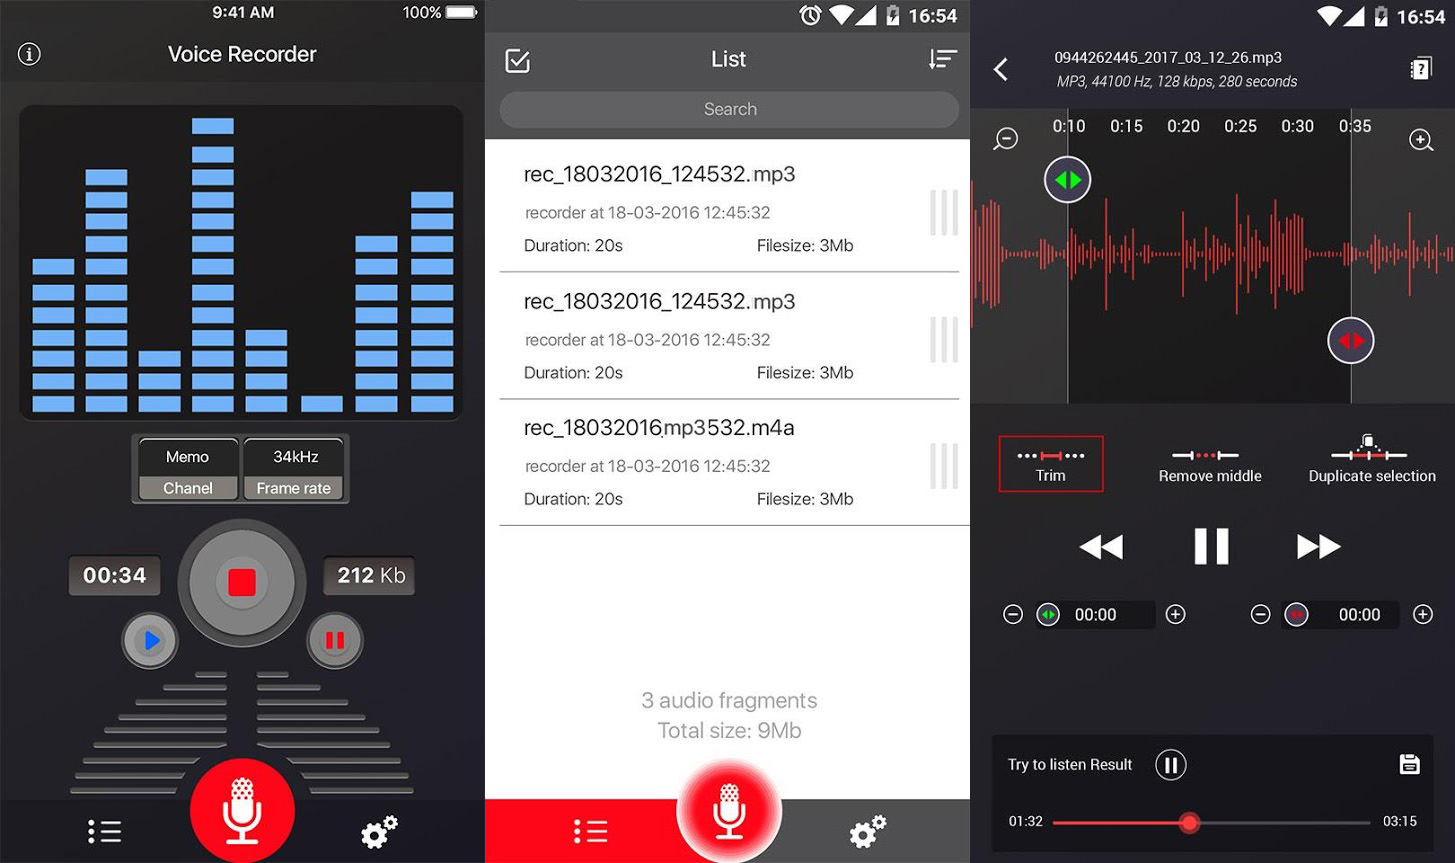 extra voice recorder lite says hours not secionds